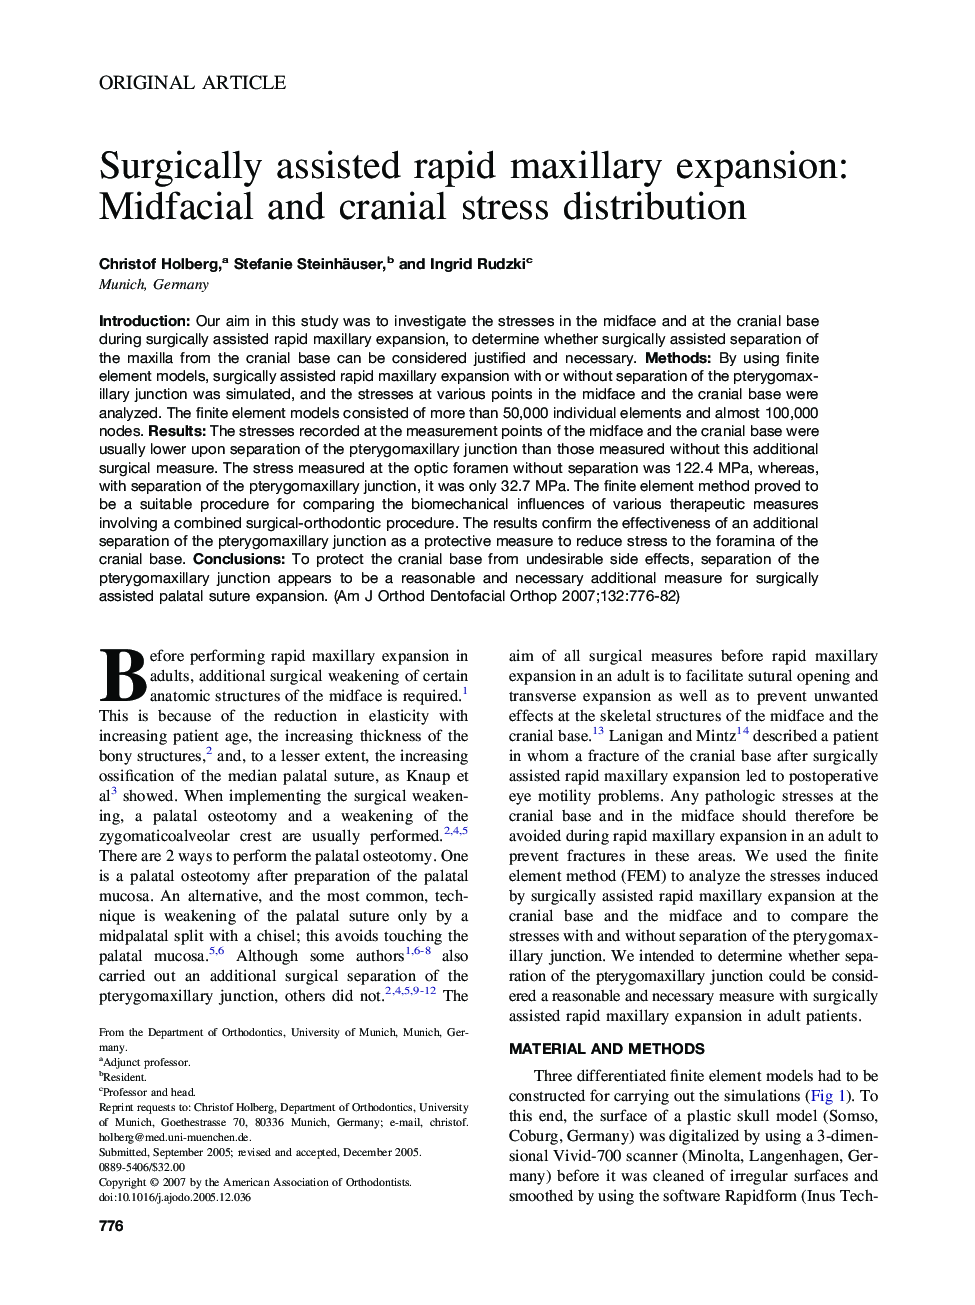 Surgically assisted rapid maxillary expansion: Midfacial and cranial stress distribution